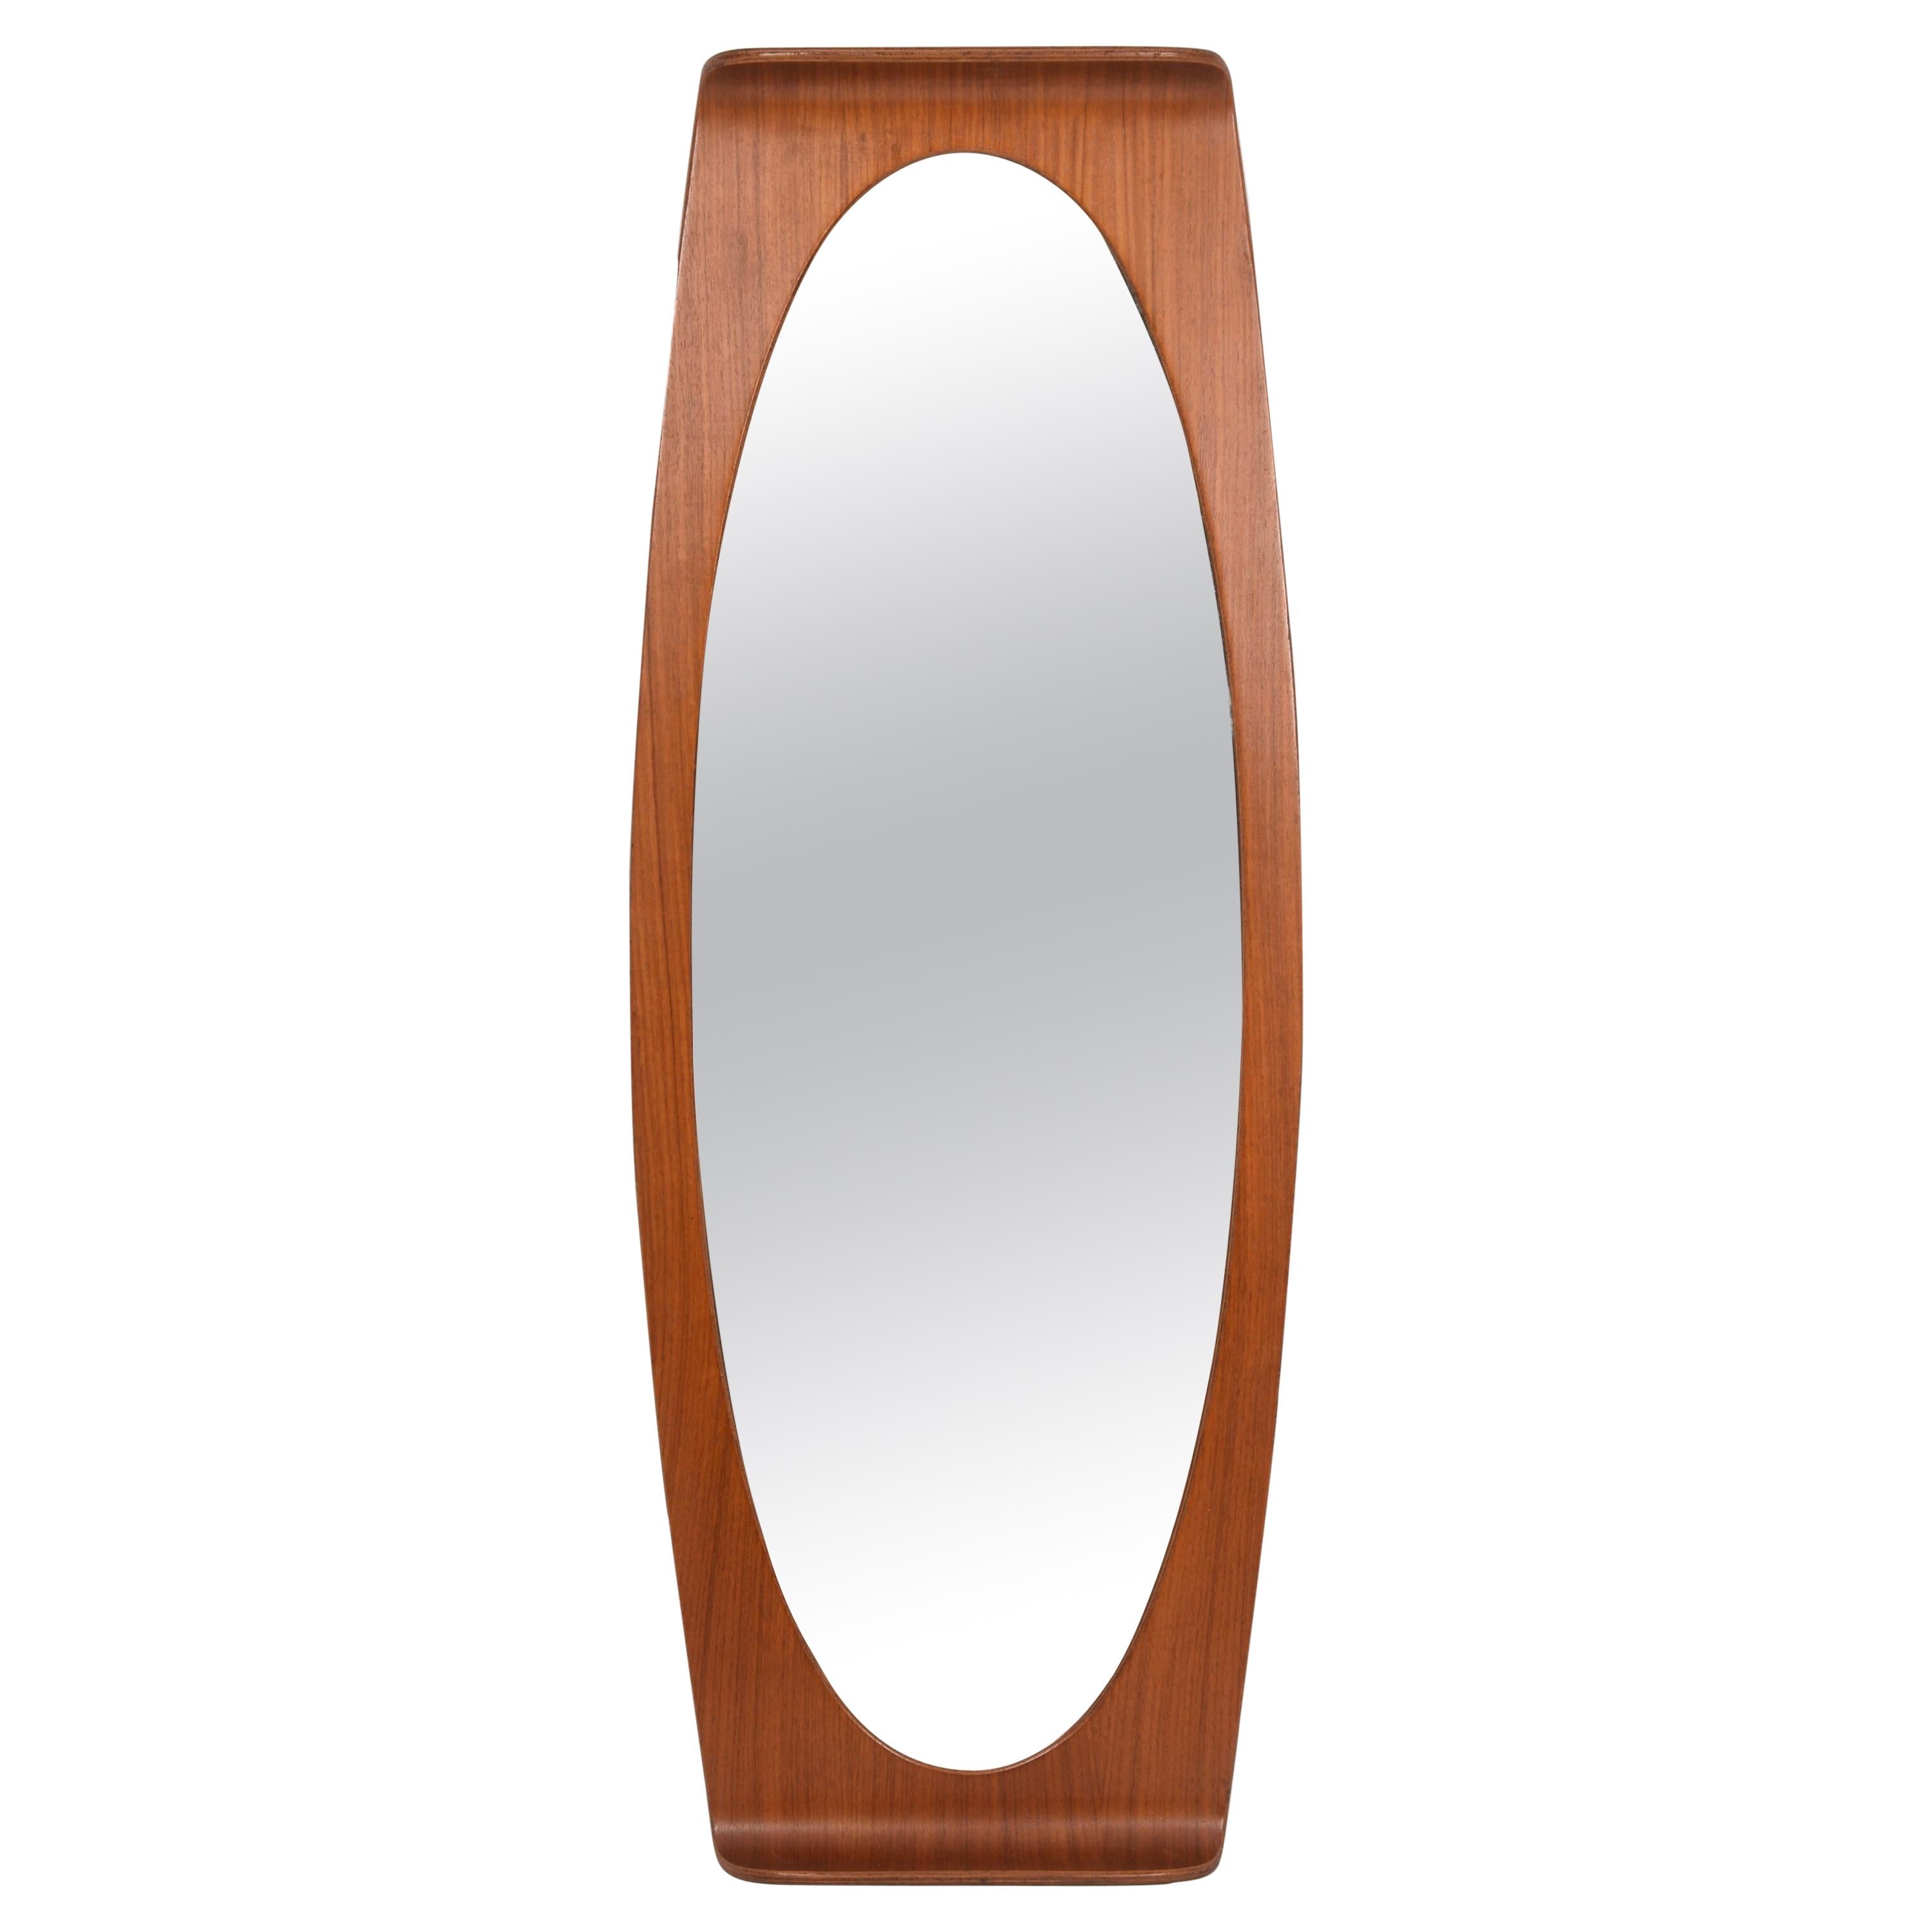 Midcentury Franco Campo and Carlo Graffi Curved Wood Italian Wall Mirror, 1960s